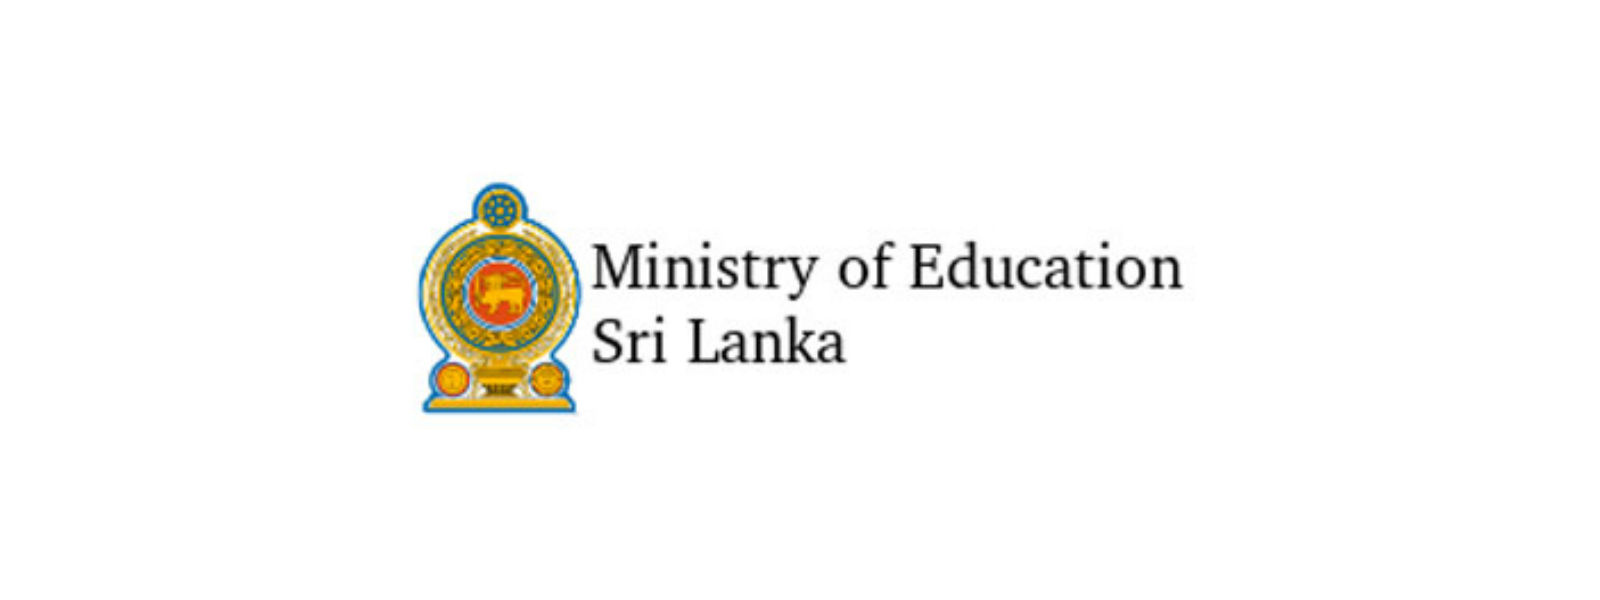 Sri Lanka Institute of Advanced Technological Education standards to be upgraded